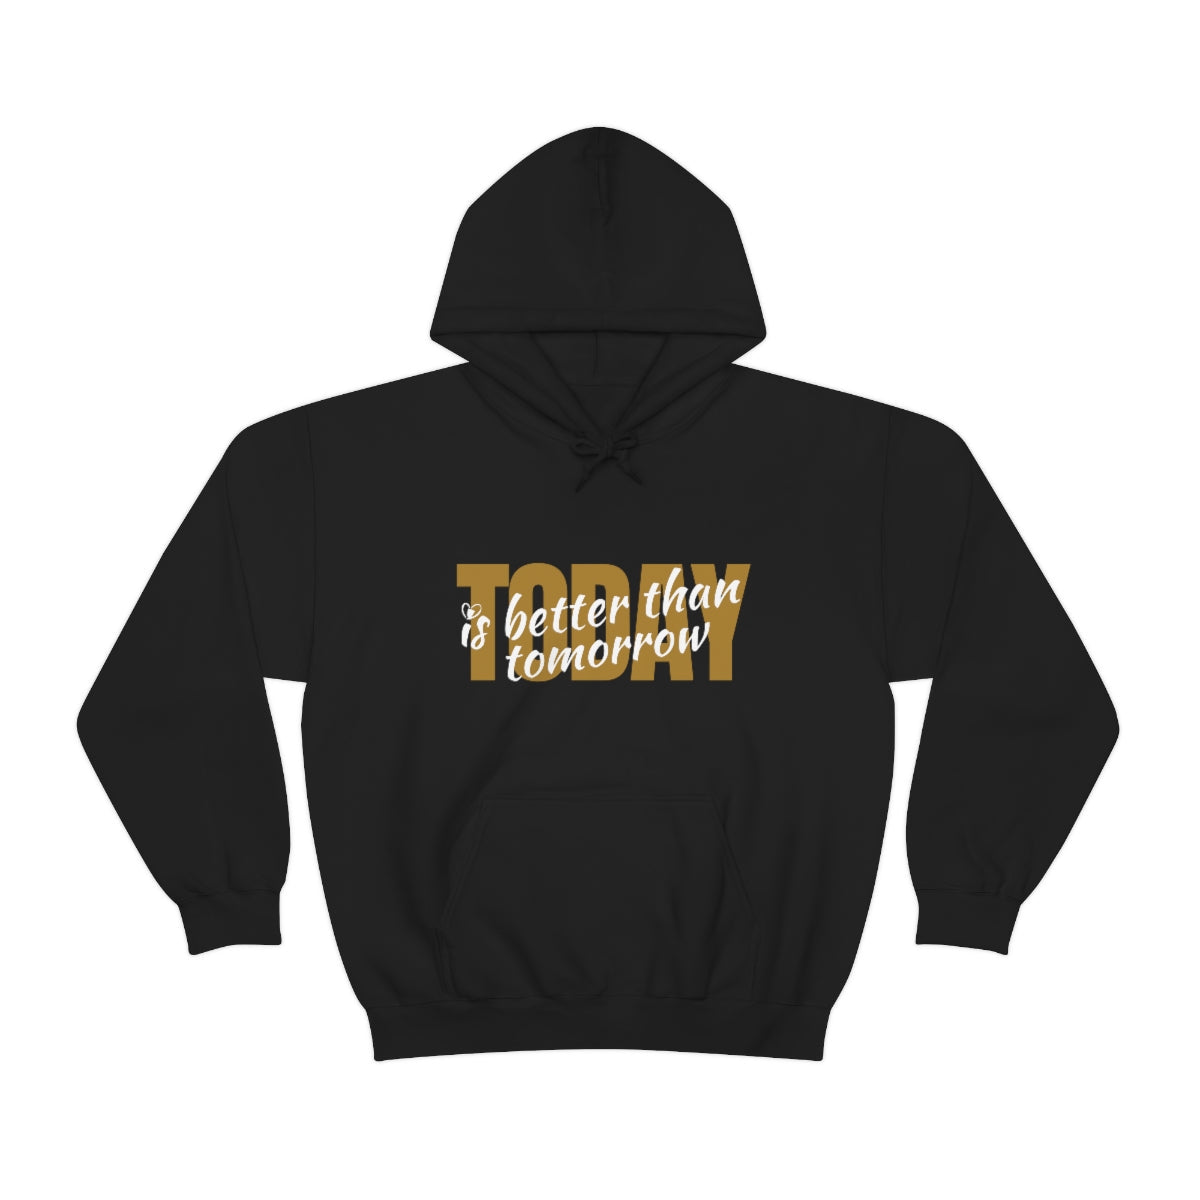 TODAY IS BETTER THAN TOMORROW HOODIE-Hoodie-Black-S-mysticalcherry